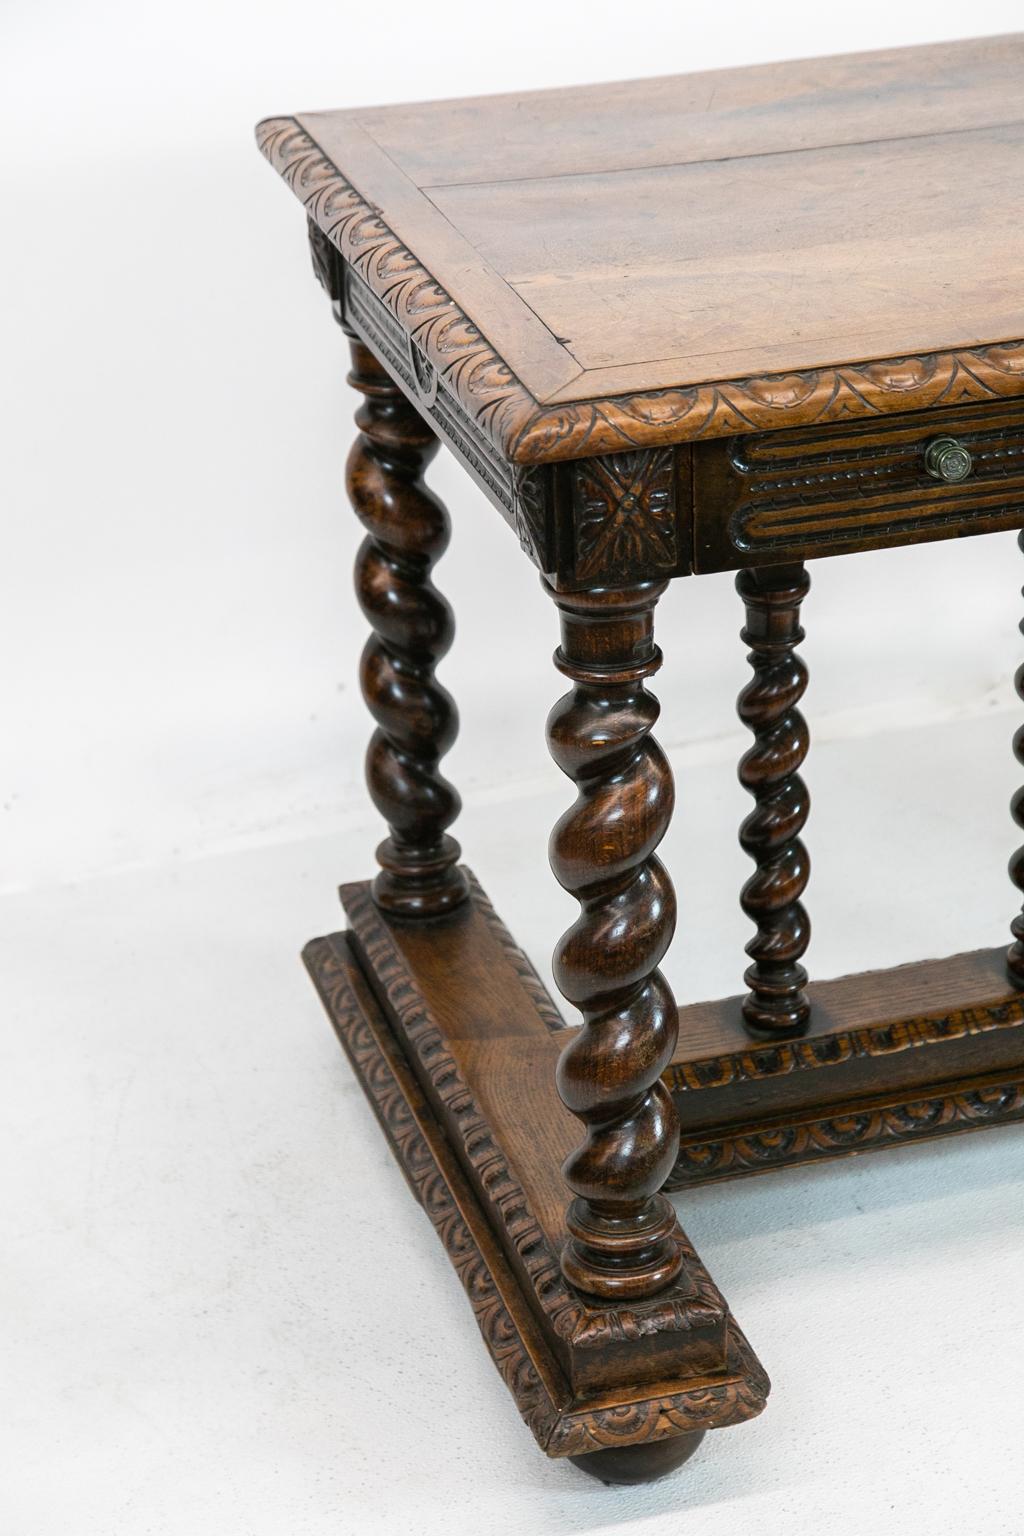 Carved walnut barley twist center table, the spindle cross stretcher with carved egg and dart moldings. All four sides have a carved leaf pattern with a center medallion.